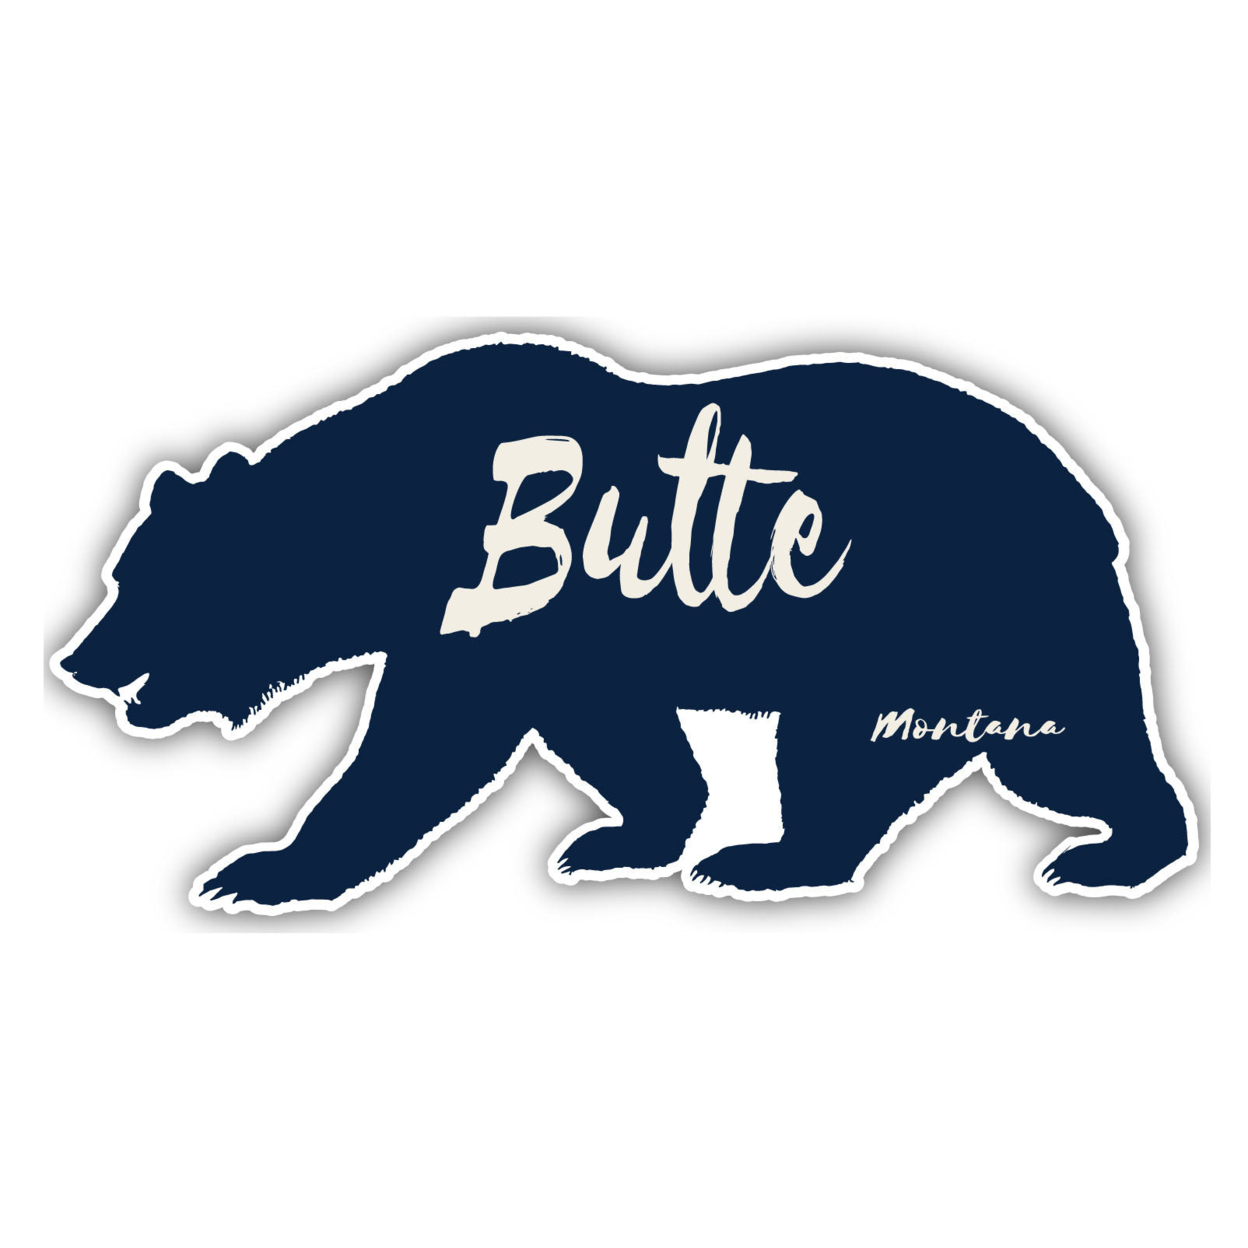 Butte Montana Souvenir Decorative Stickers (Choose Theme And Size) - 4-Pack, 2-Inch, Bear